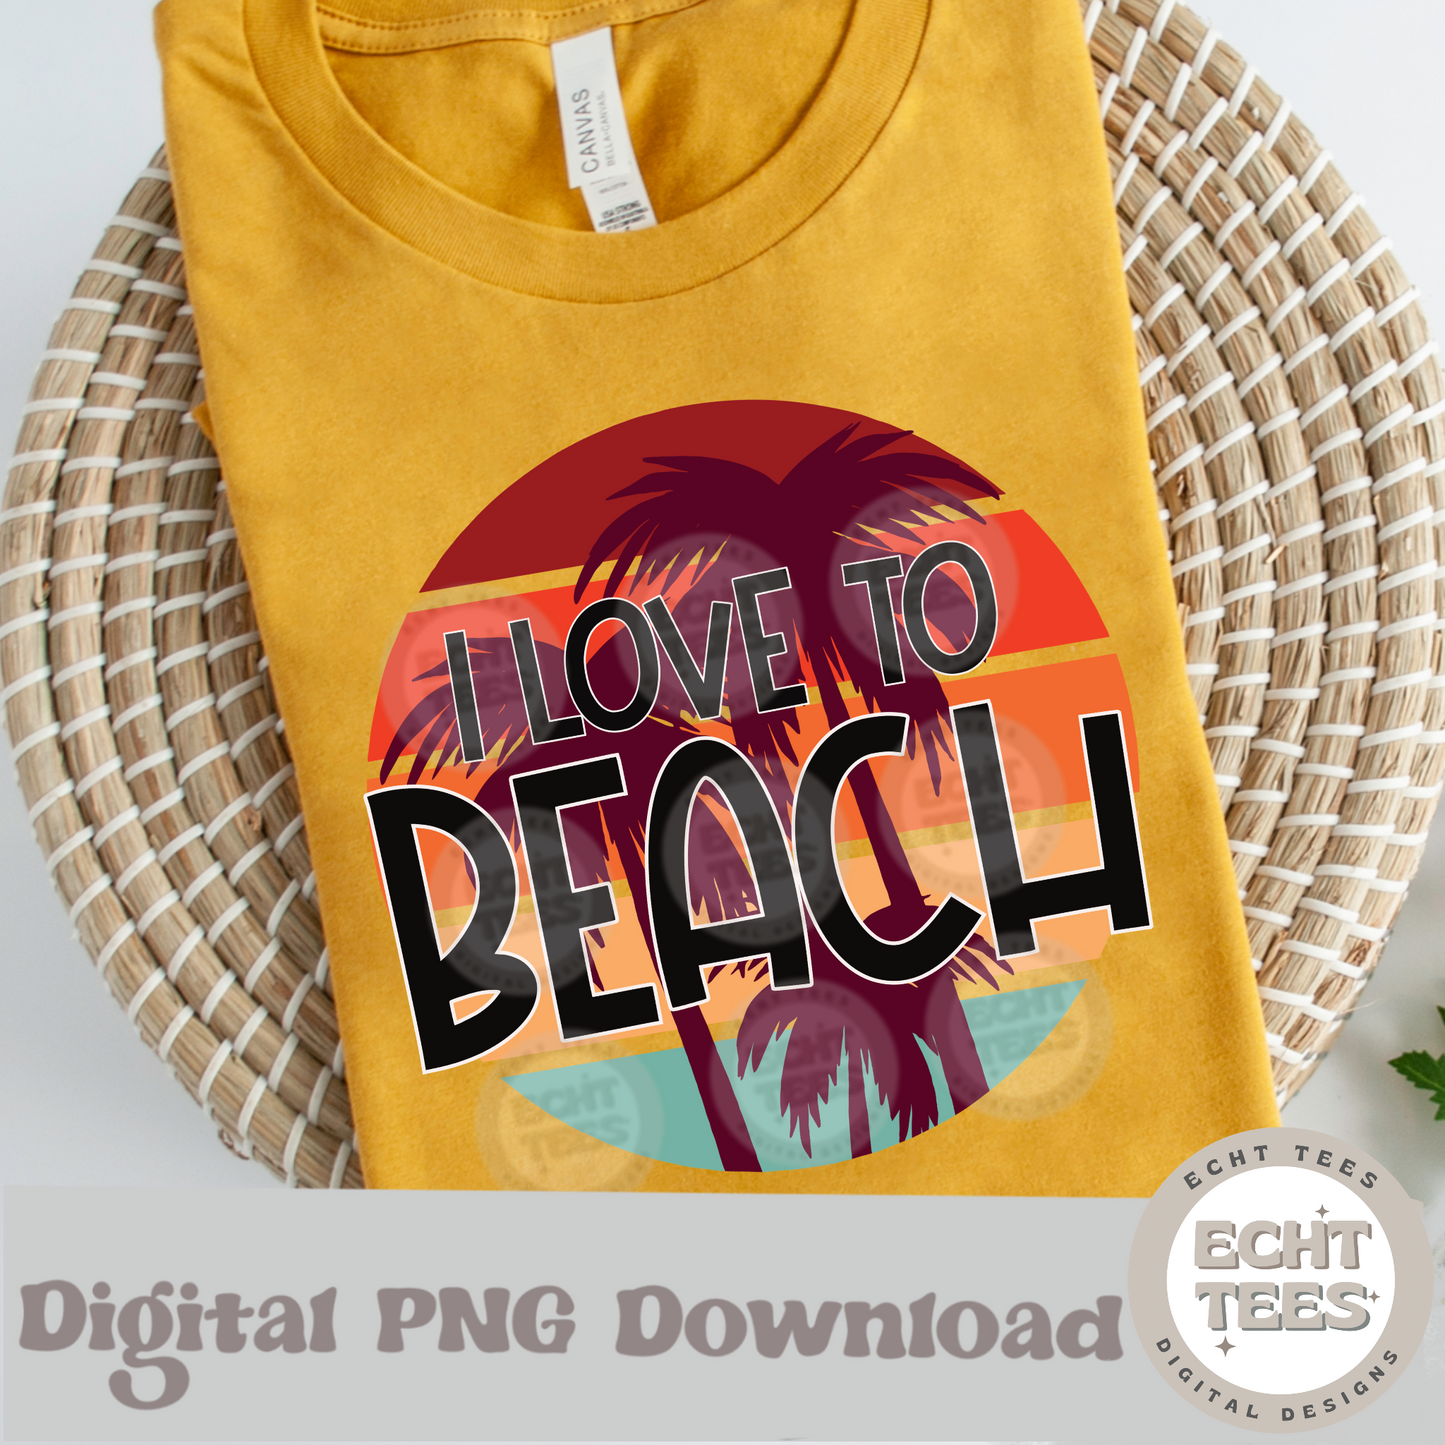 I Love to Beach PNG Digital Download